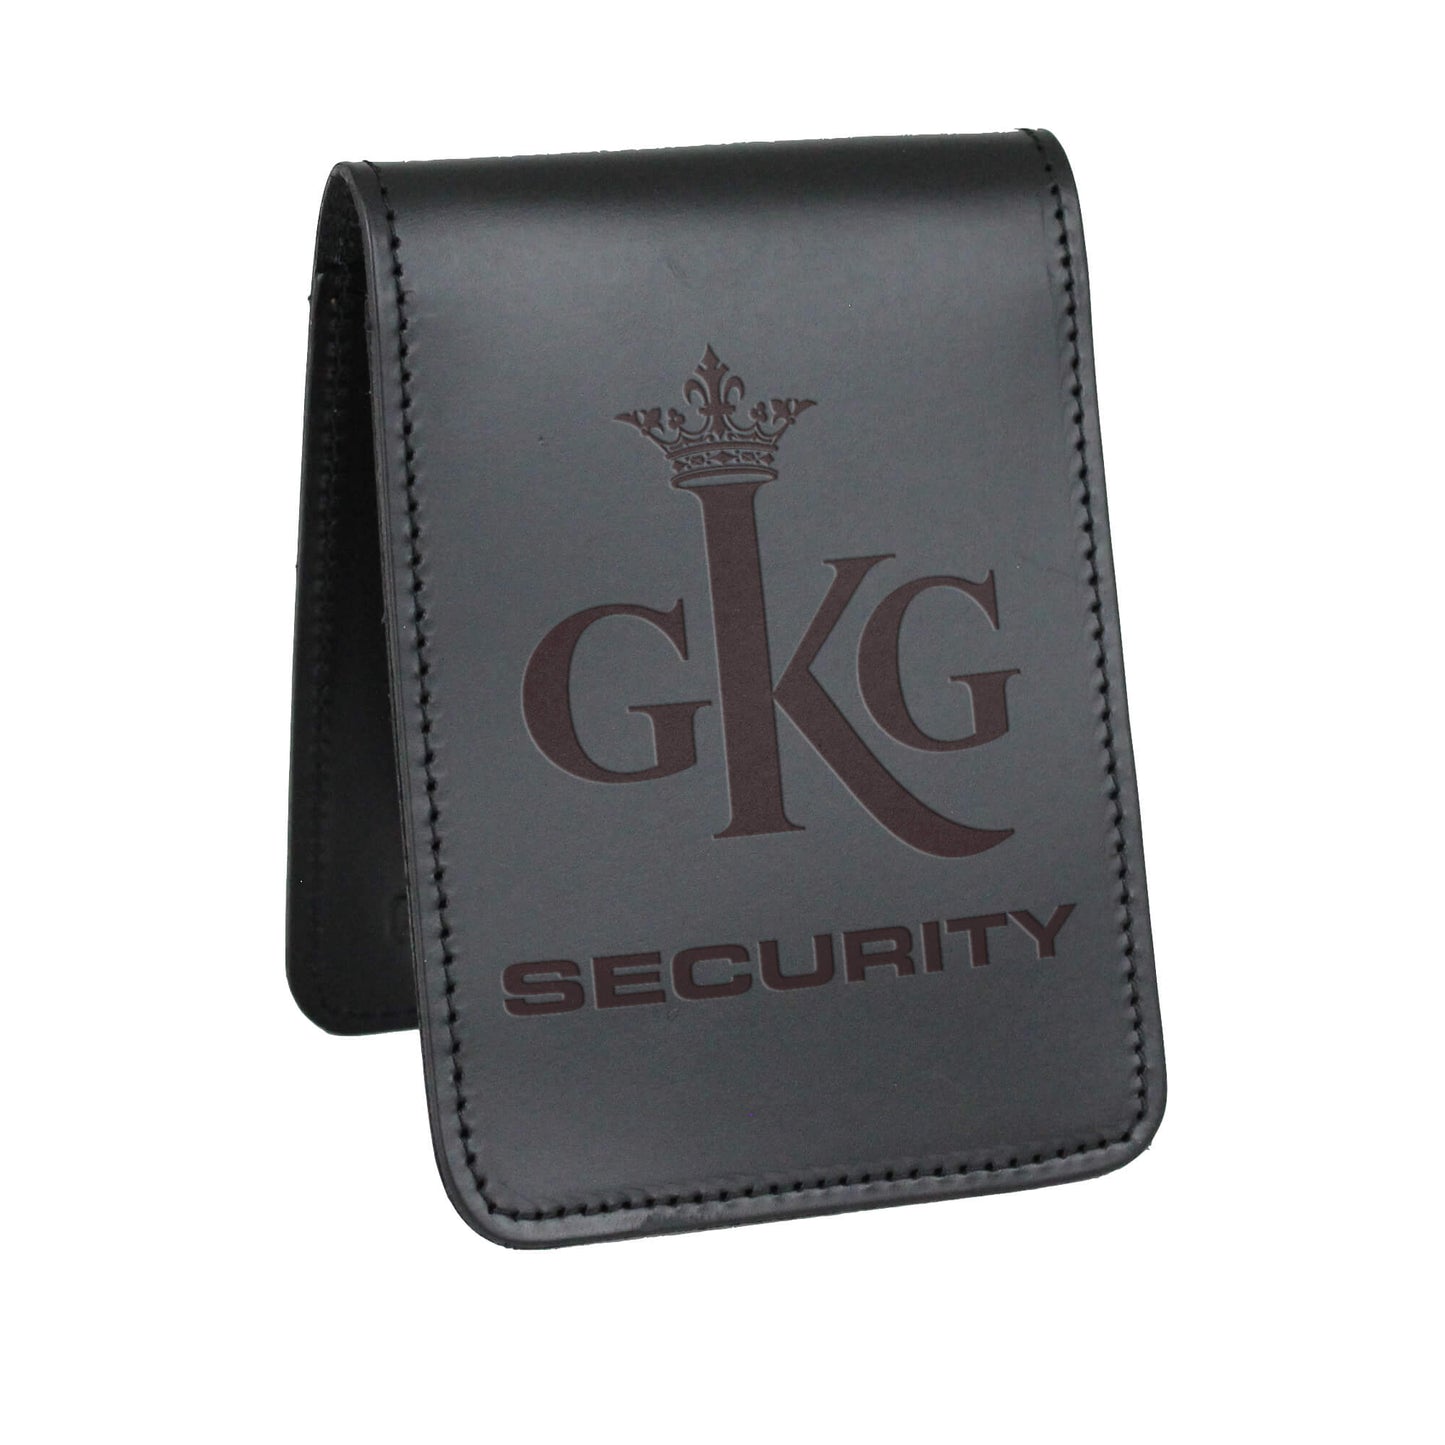 GKG Security Notebook Cover